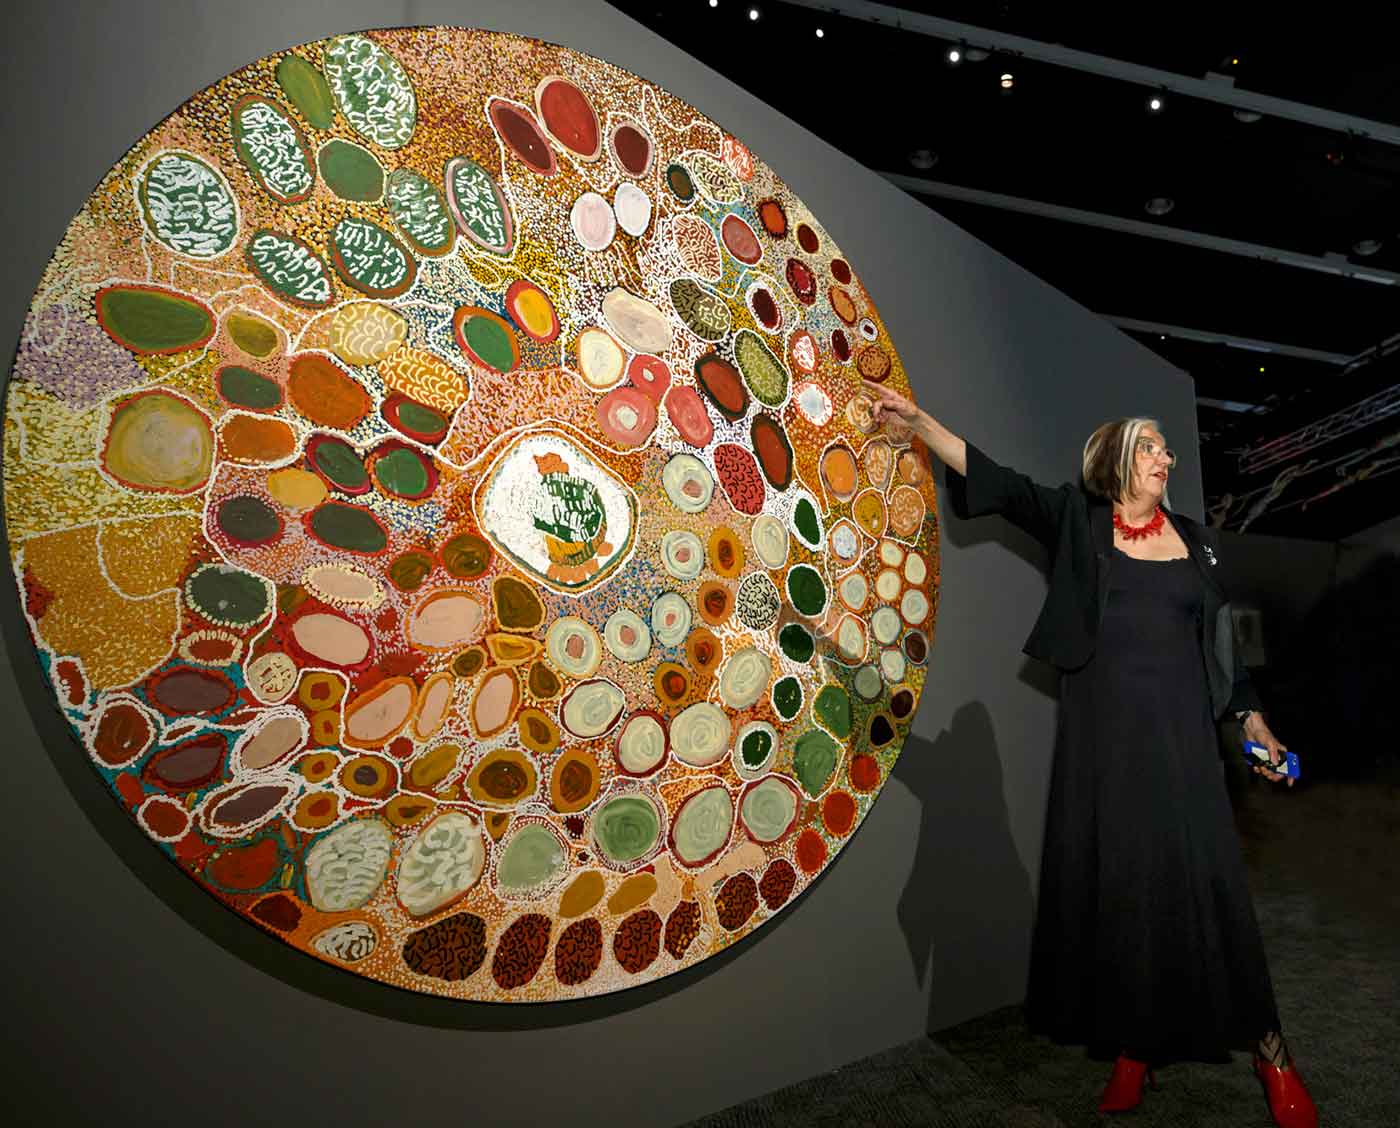 A woman pointing at a large circular Indigenous artwork mounted on an exhibition panel.